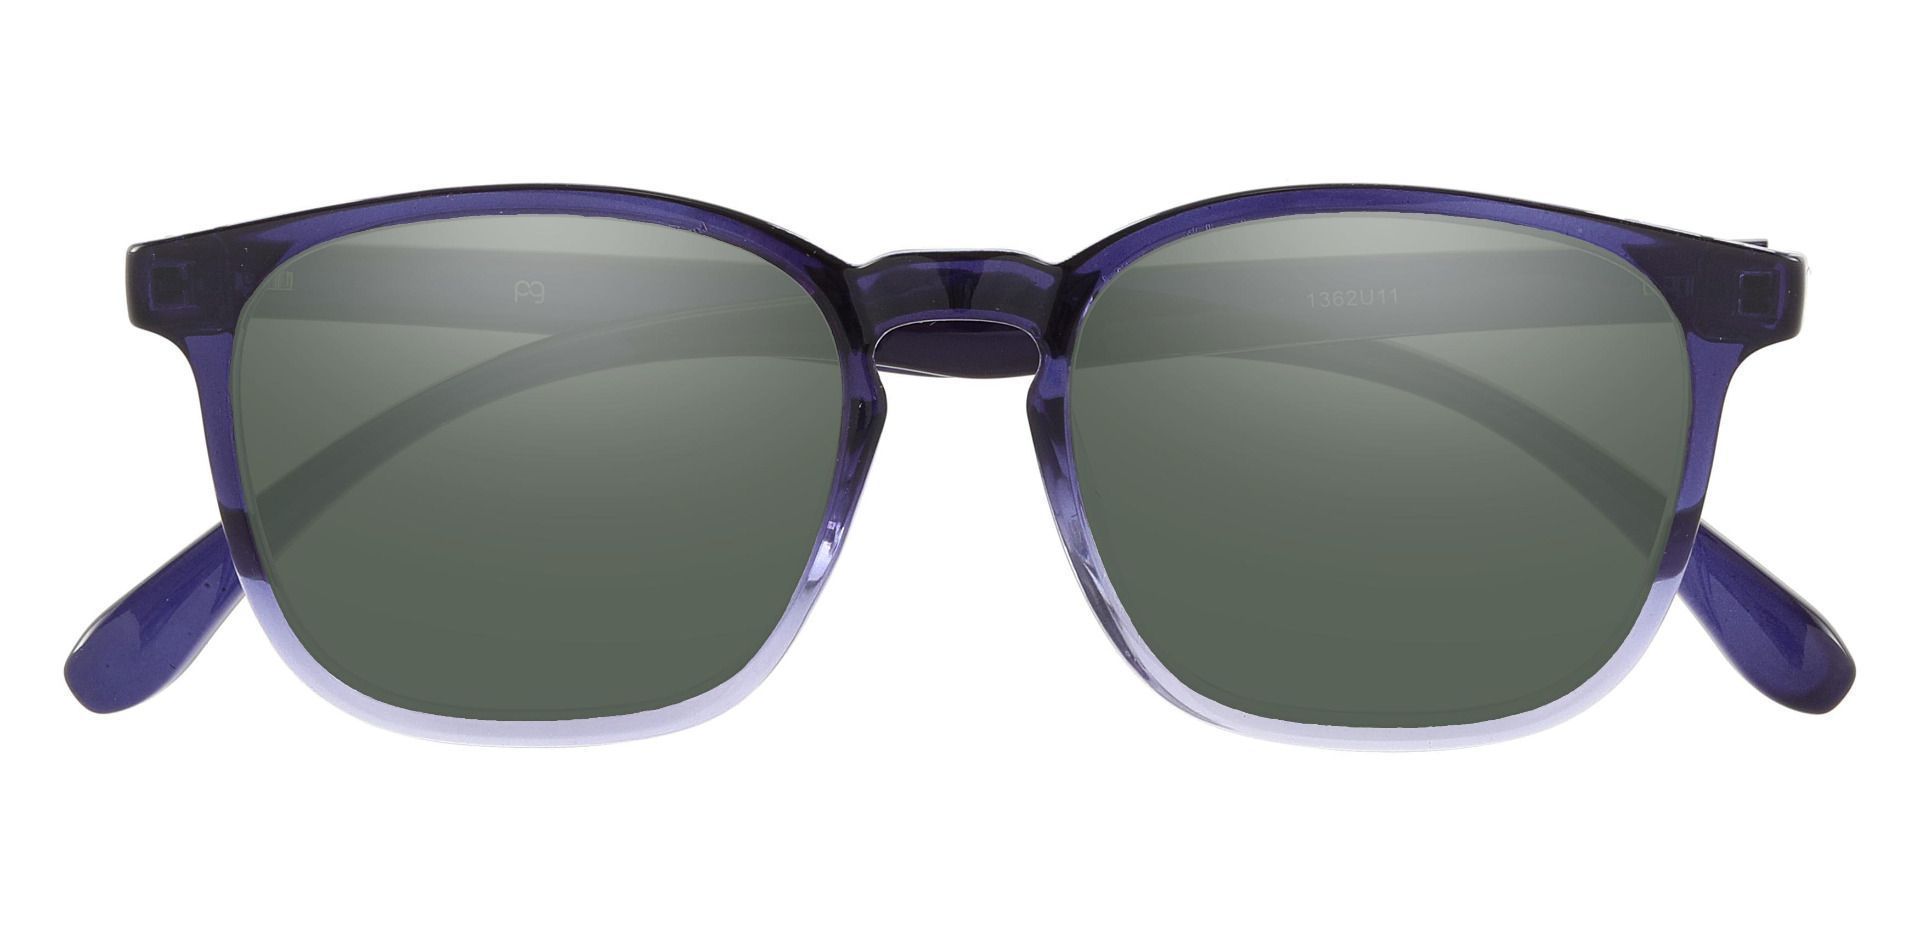 Gateway Square Reading Sunglasses - Blue Frame With Green Lenses